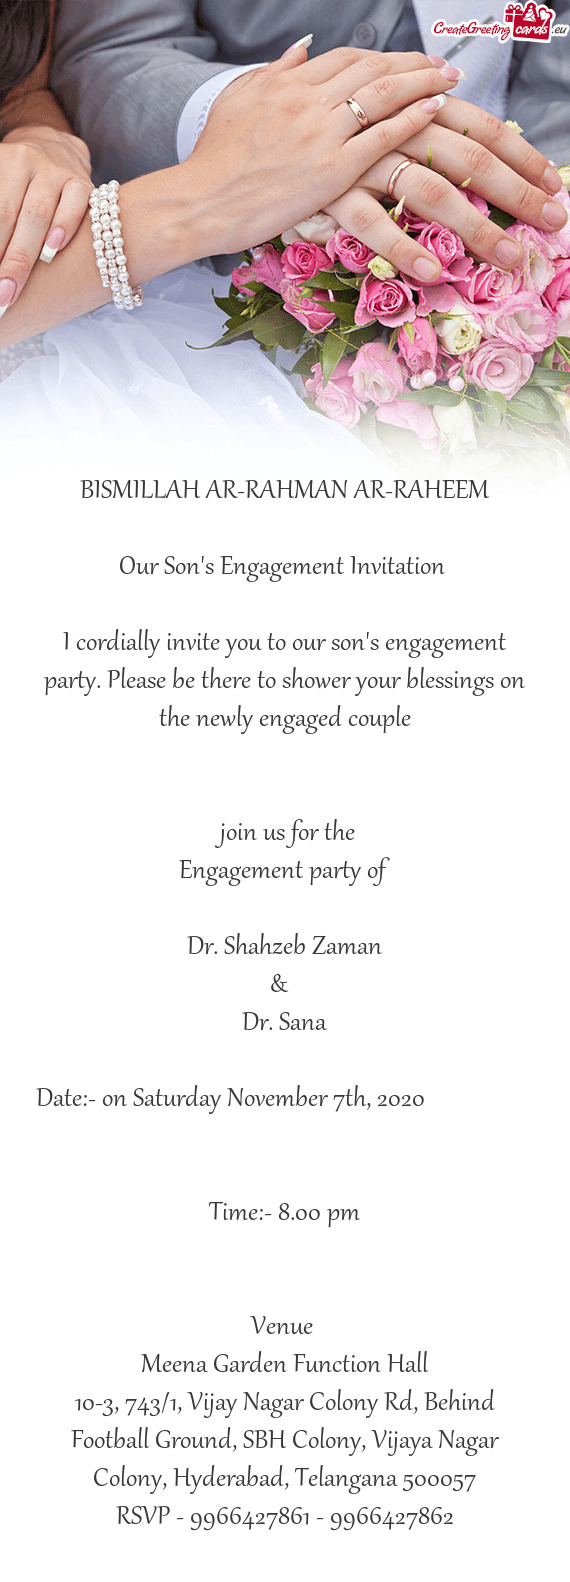 BISMILLAH AR-RAHMAN AR-RAHEEM
 
 Our Son's Engagement Invitation 
 
 I cordially invite you to our